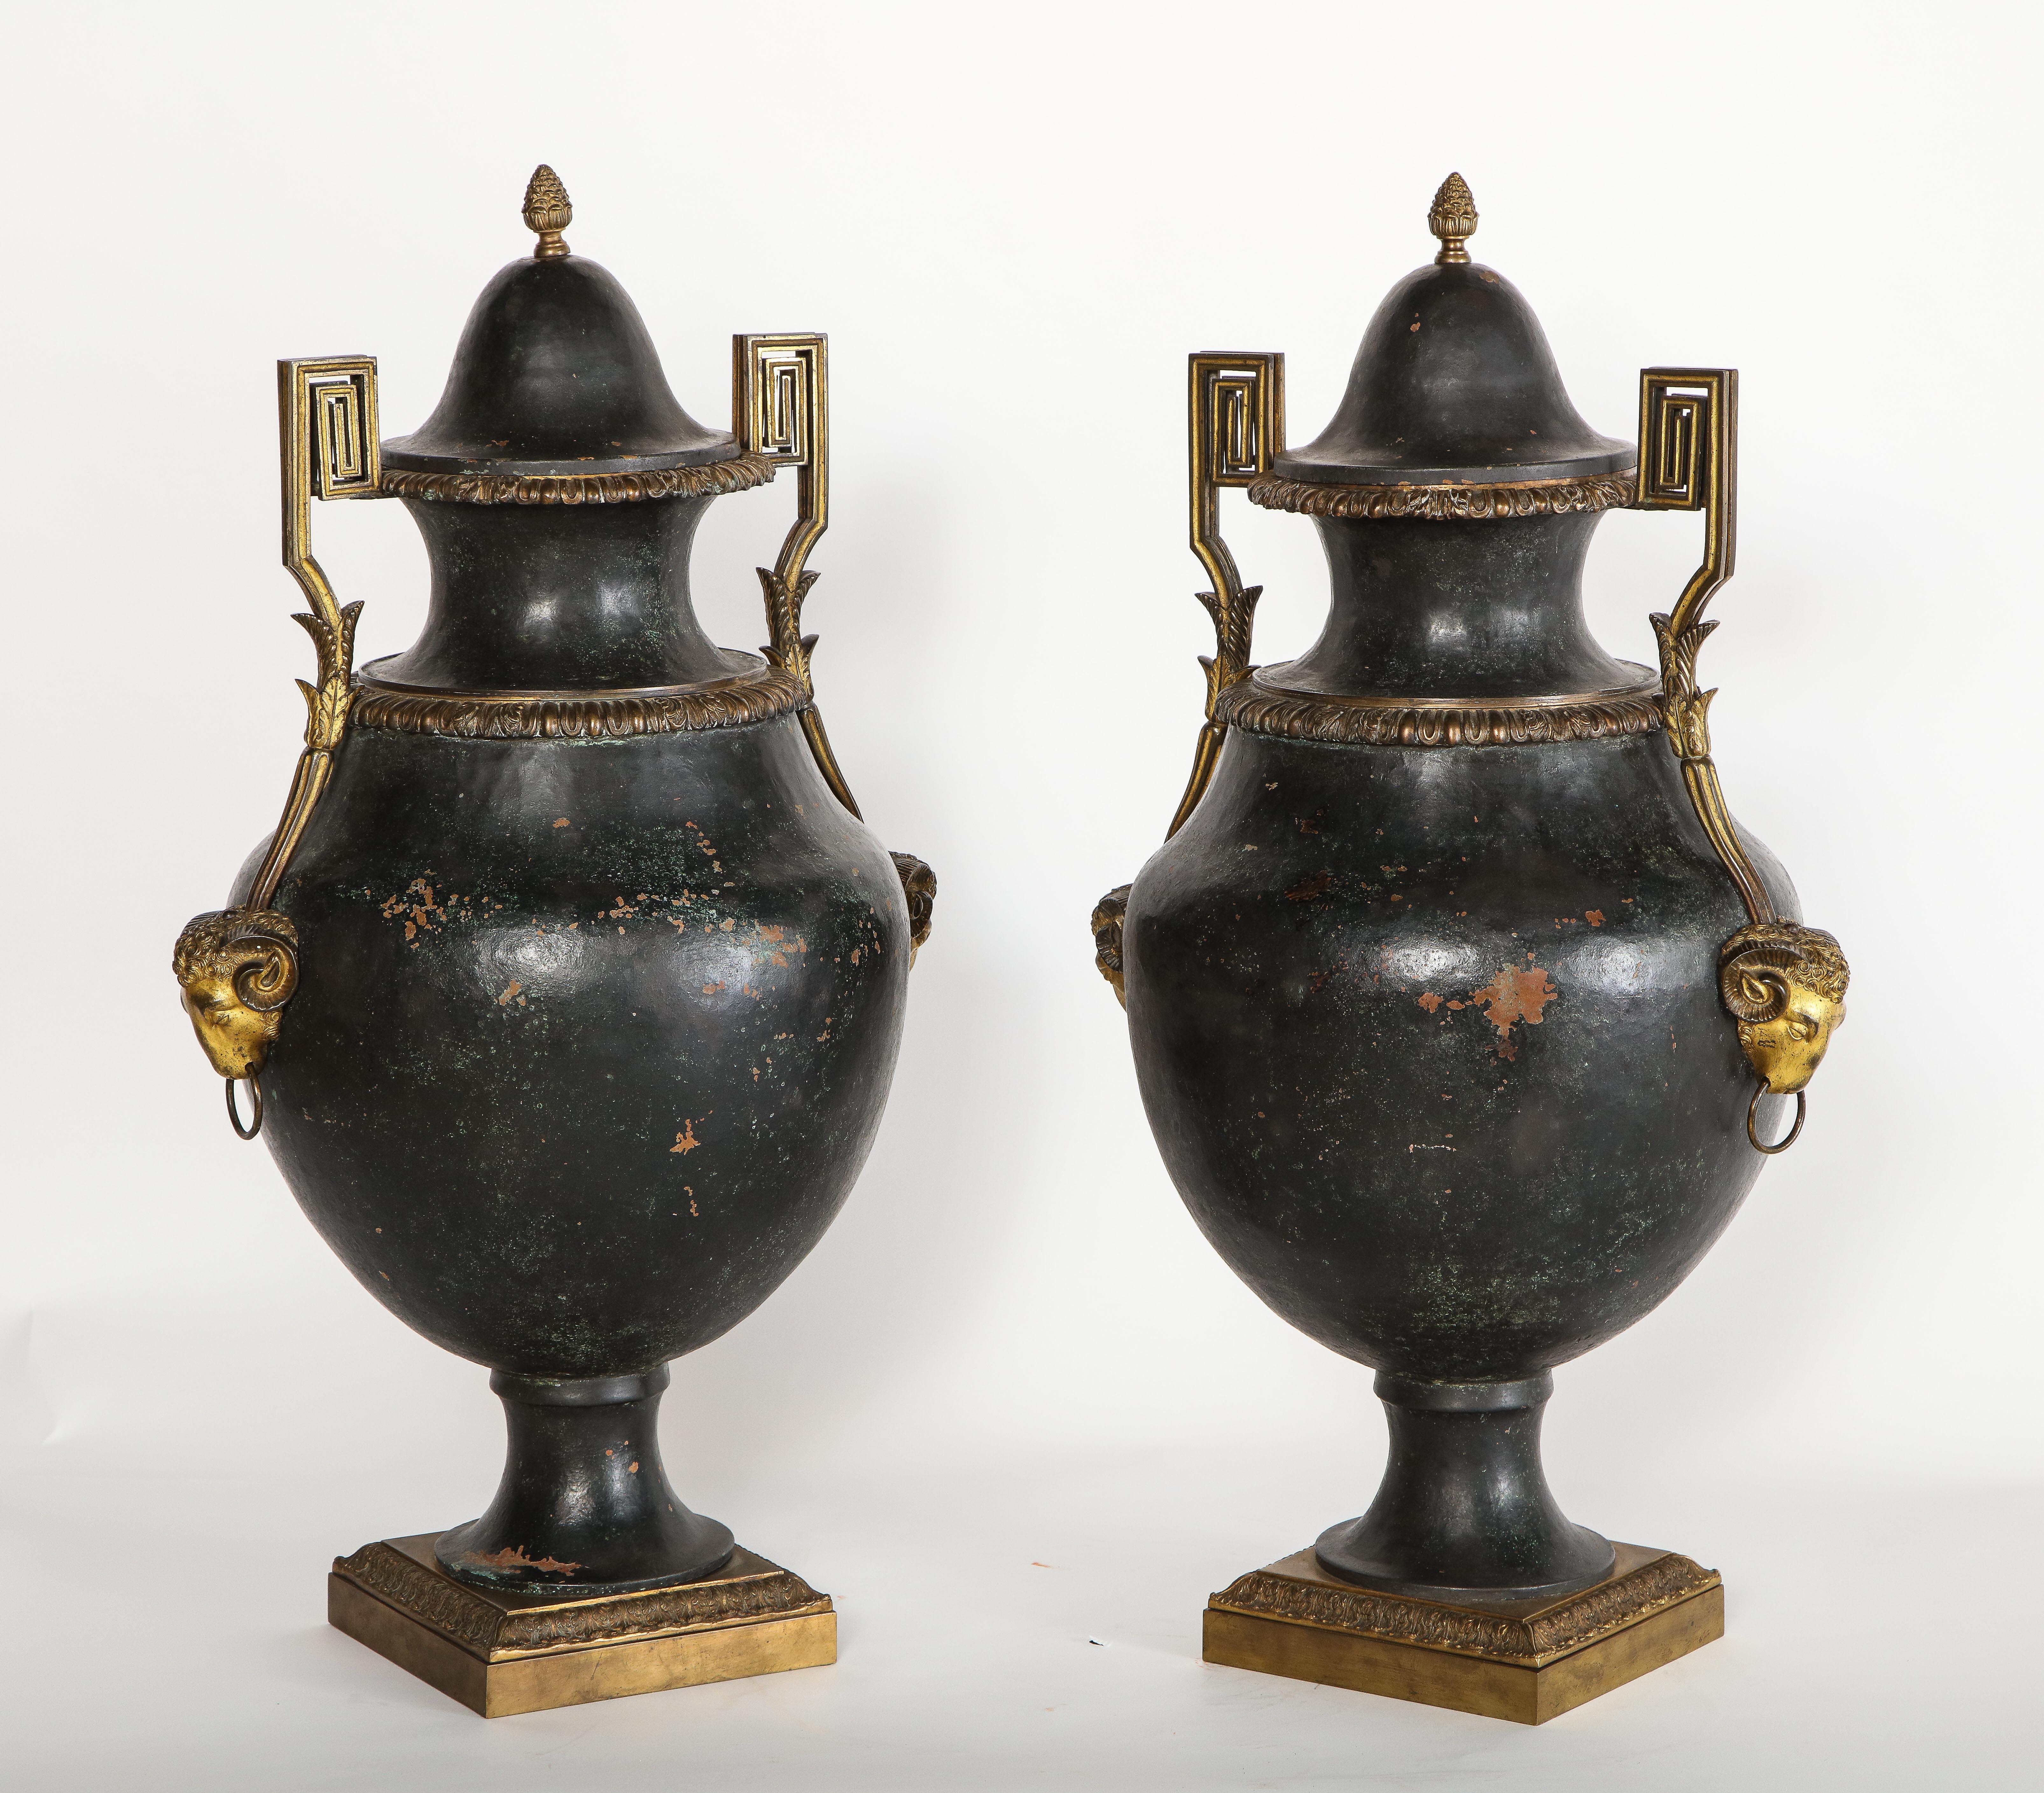 A fabulous and Palace size pair of French/North European painted tole and dore bronze mounted neoclassical covered vases. This beautiful pair of original covered vases are exquisitely made with a fabulous black patinated tole body each with two